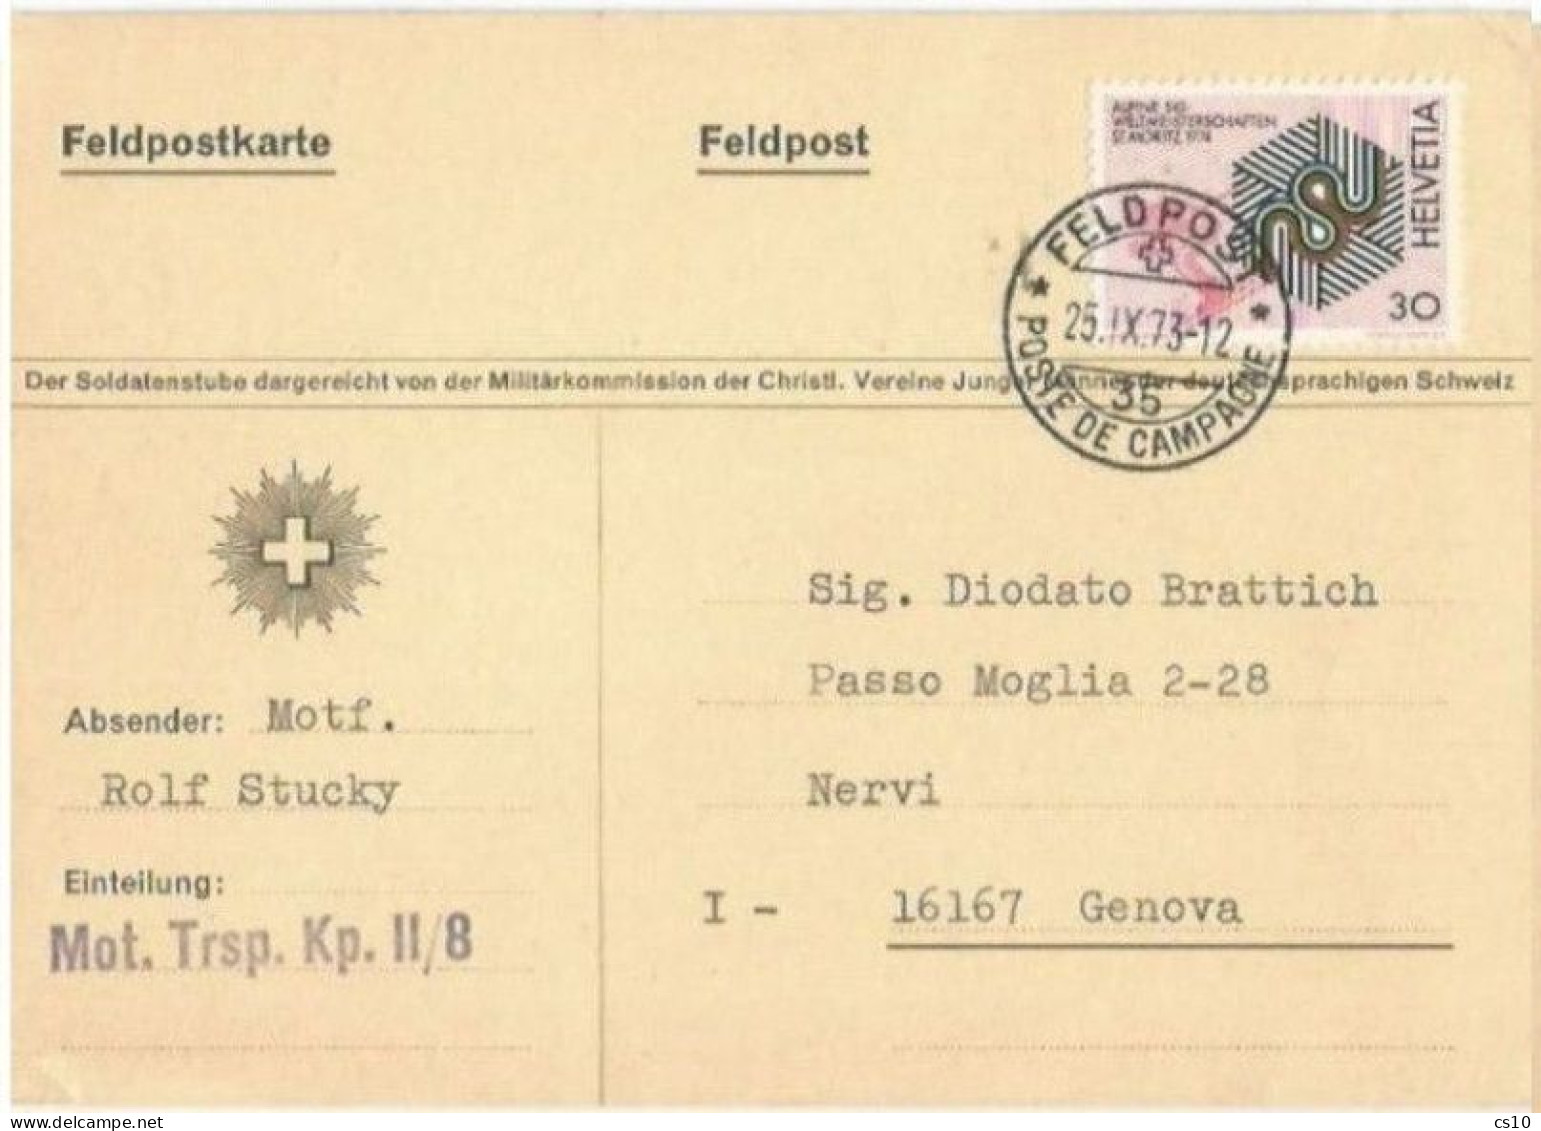 Suisse Feldpost Karte With Timbre-poste C30 Annulé Feldpost - Poste De Campagne 25nov1973 To Italy - REAL MILITAR MAIL - Covers & Documents